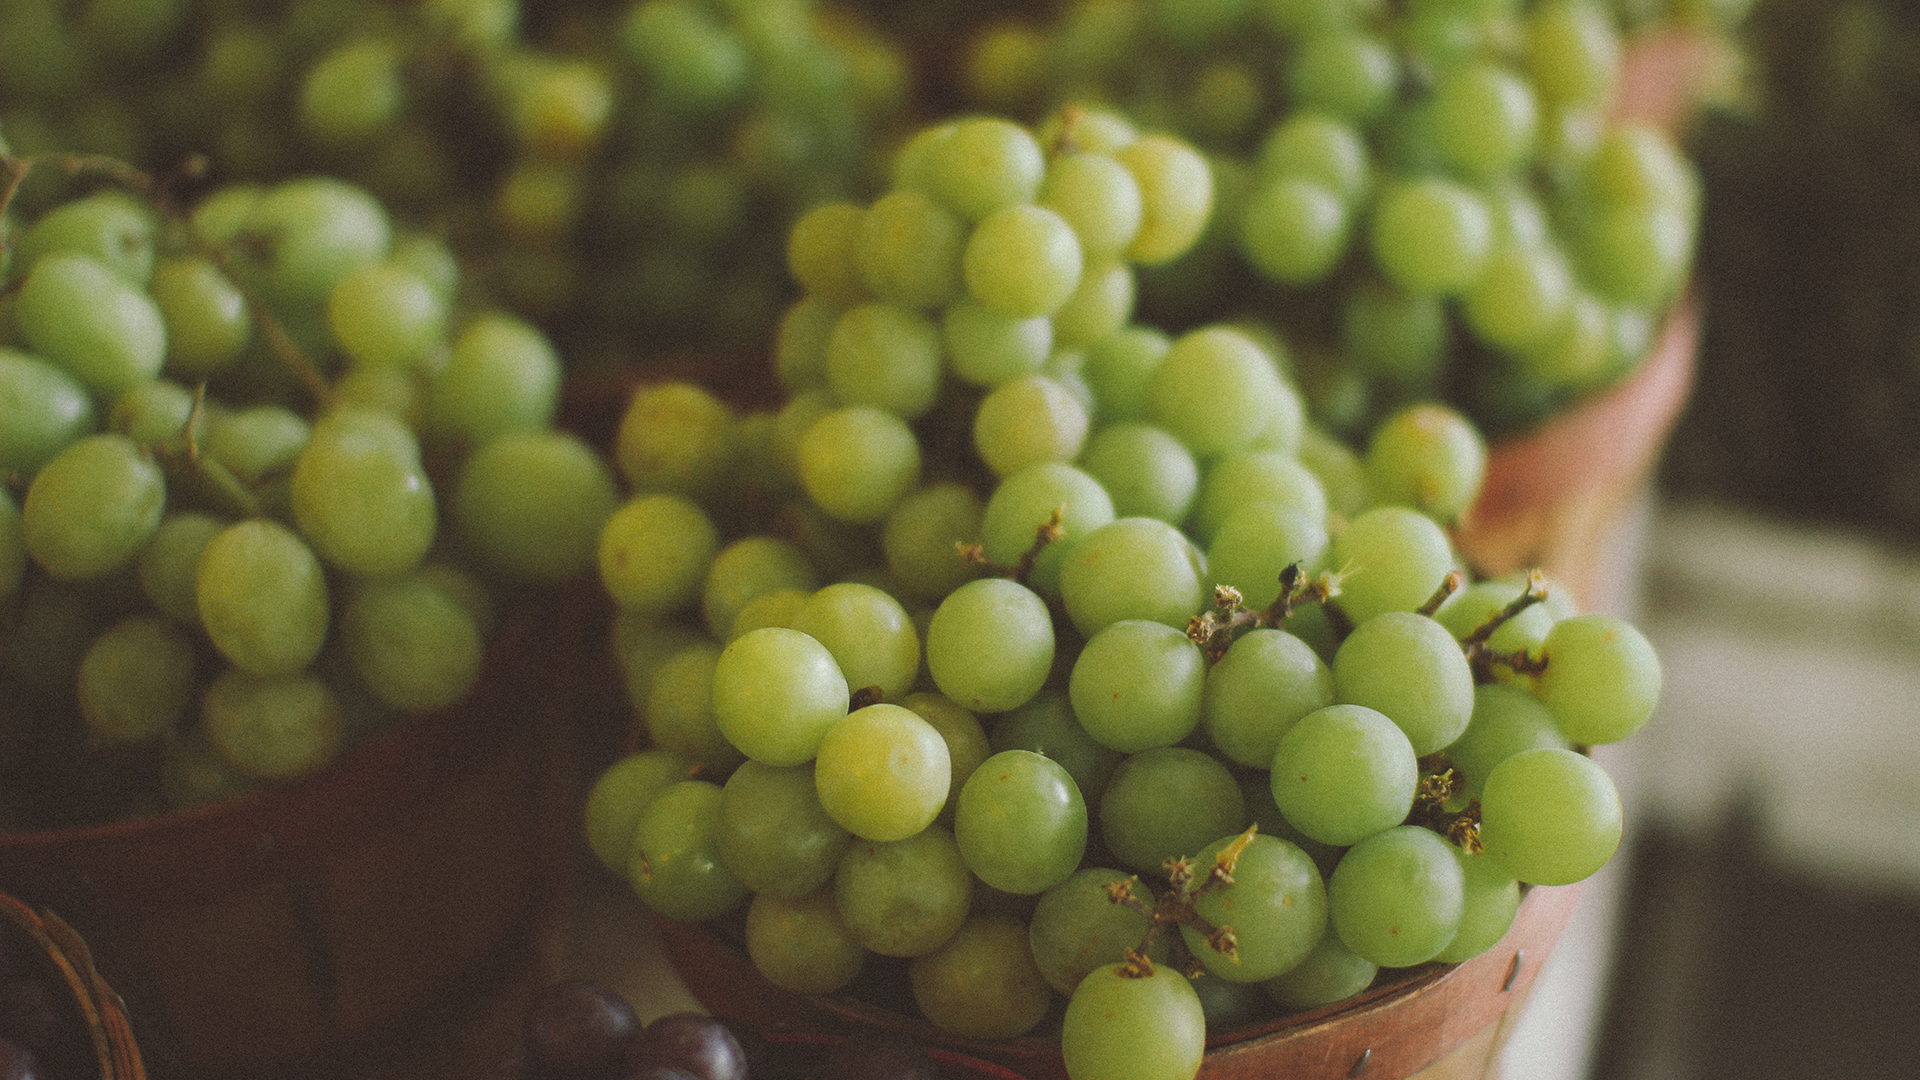 General 1920x1080 grapes photography fruit food green